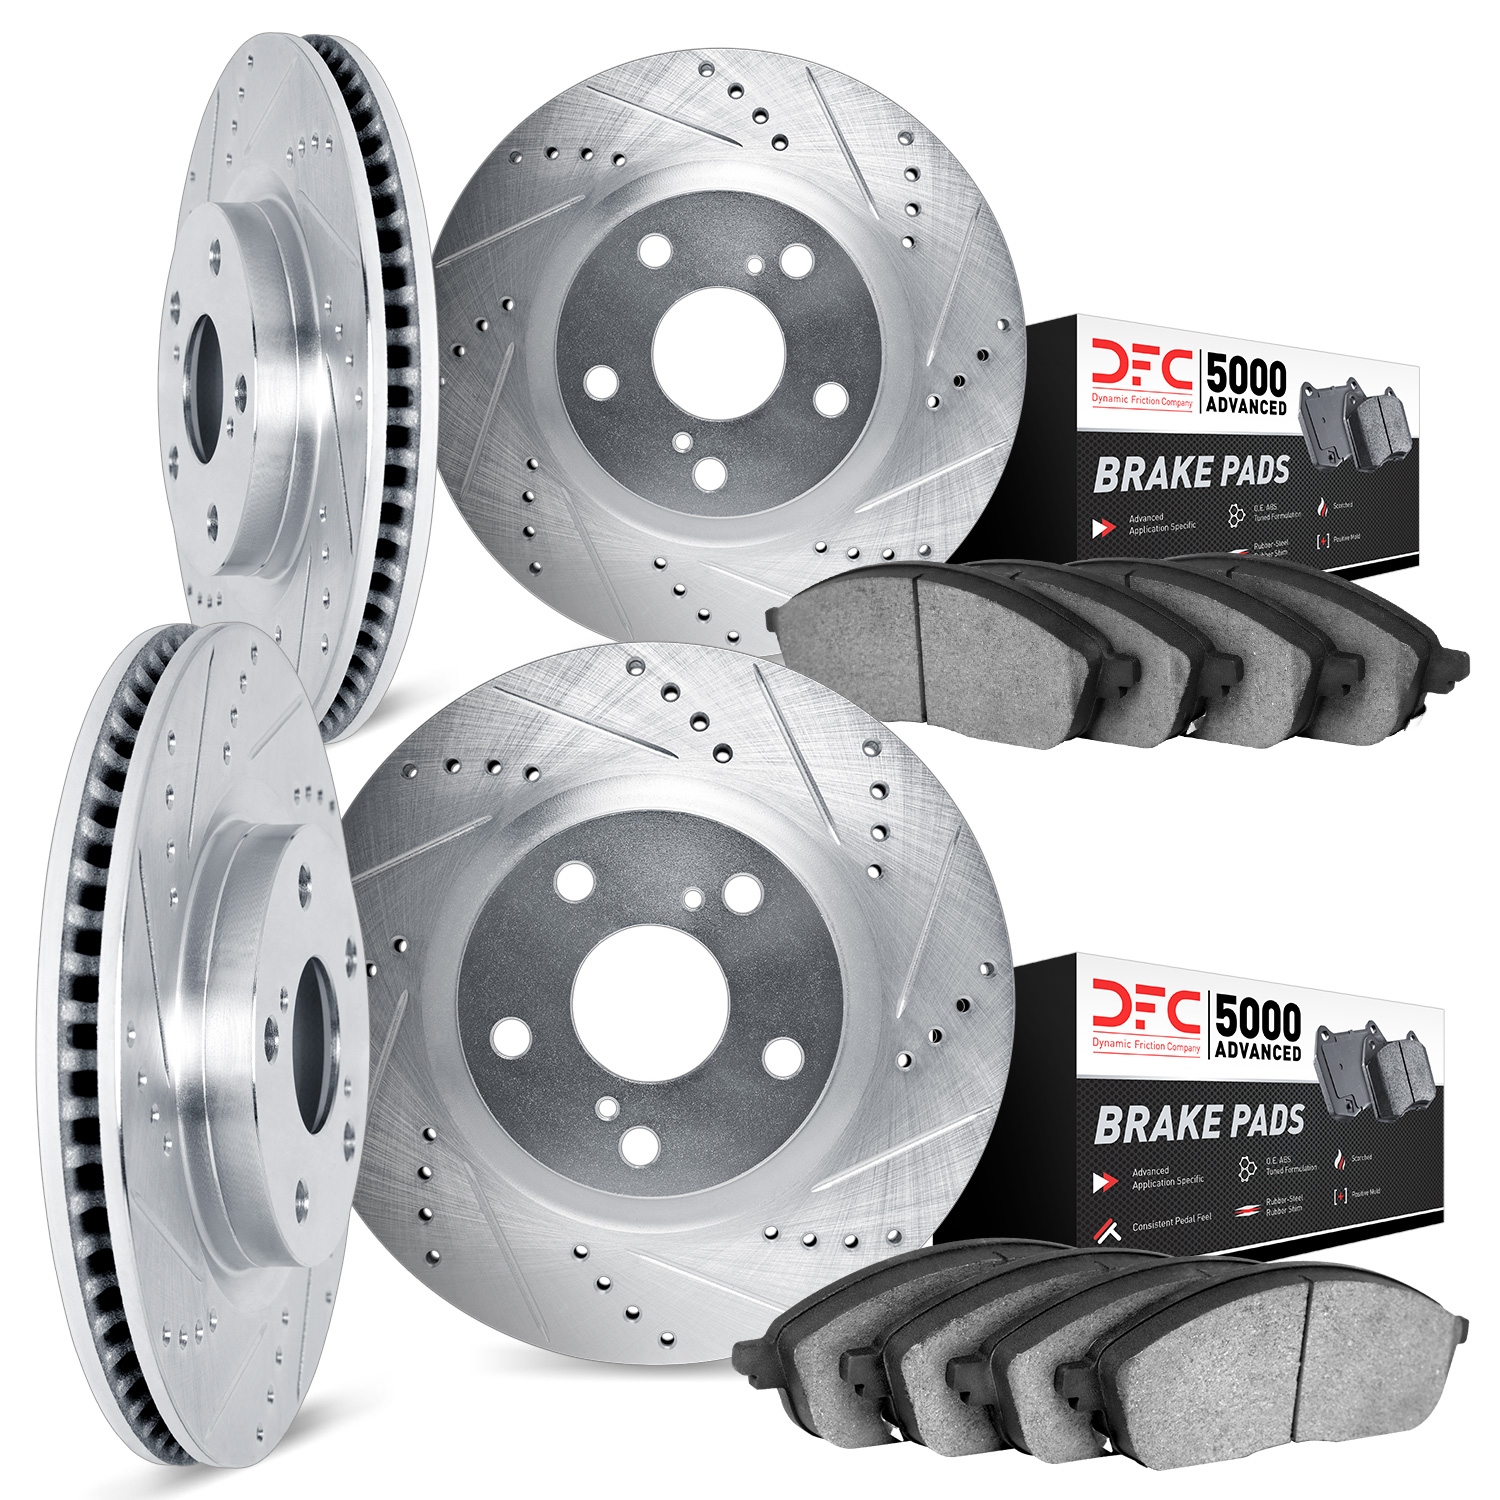 7504-11012 Drilled/Slotted Brake Rotors w/5000 Advanced Brake Pads Kit [Silver], 2005-2007 Land Rover, Position: Front and Rear